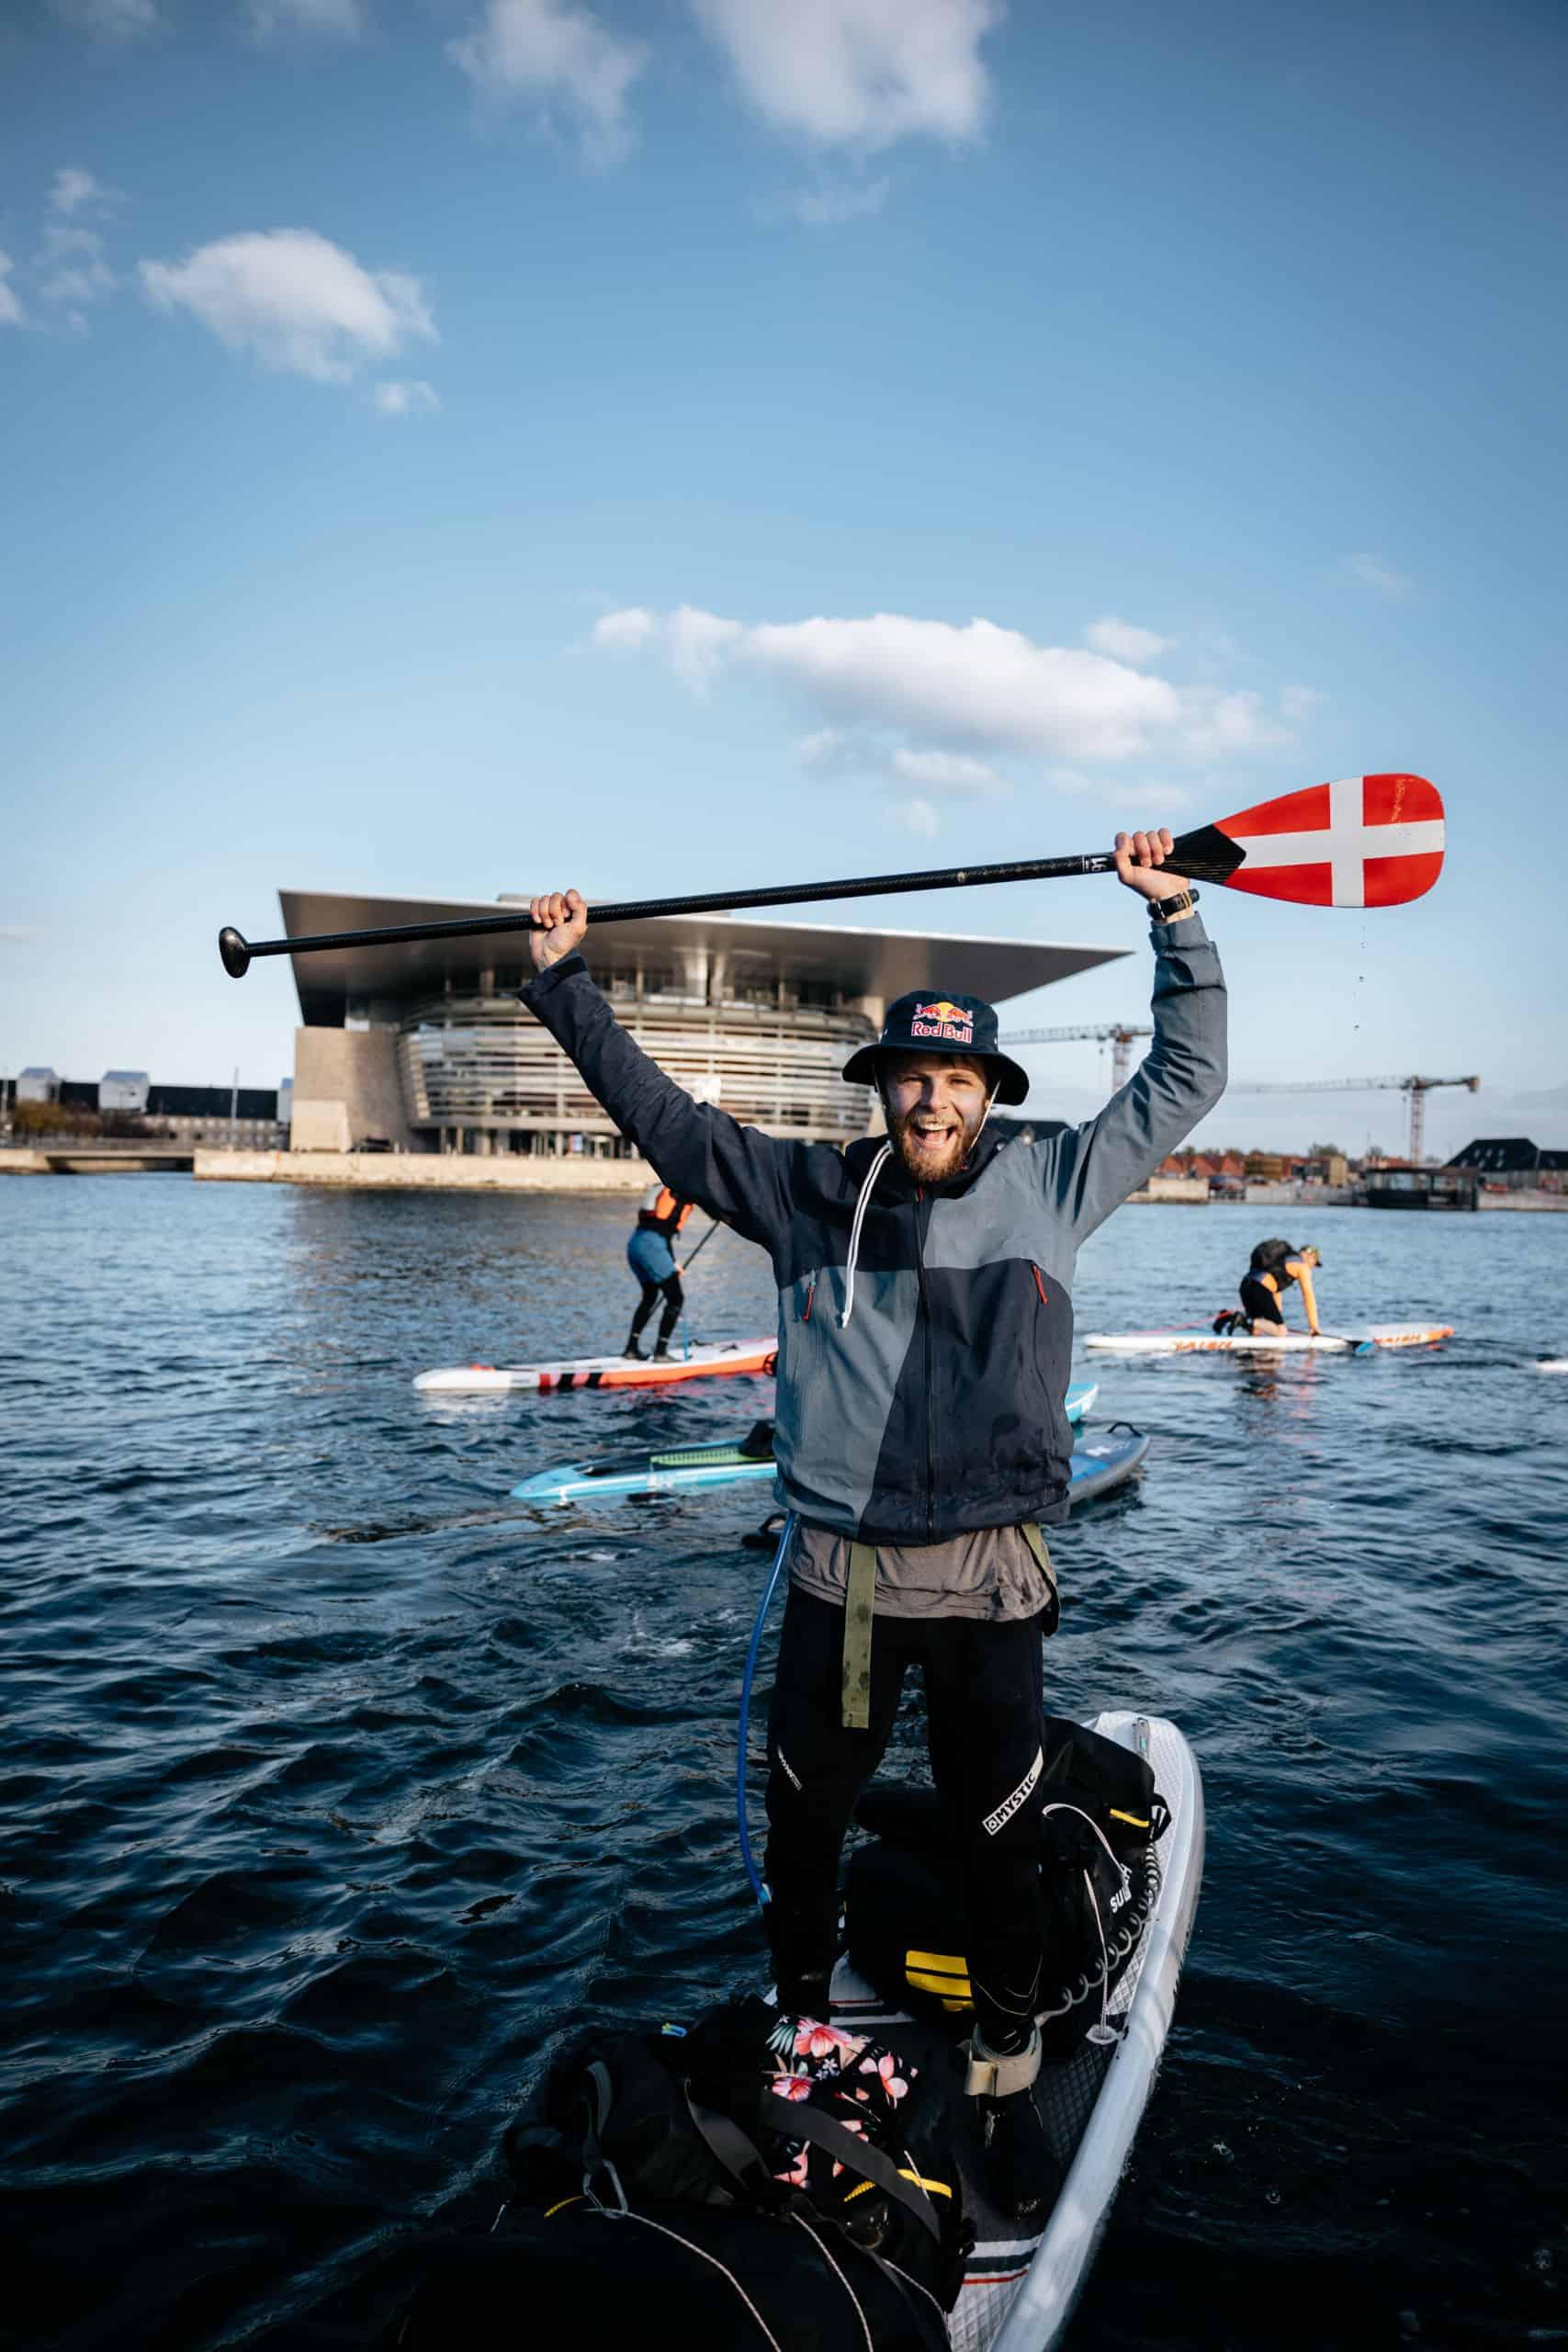 Casper Steinfath becomes first person to circumnavigate Denmark on a SUP board!!! - Naish.com